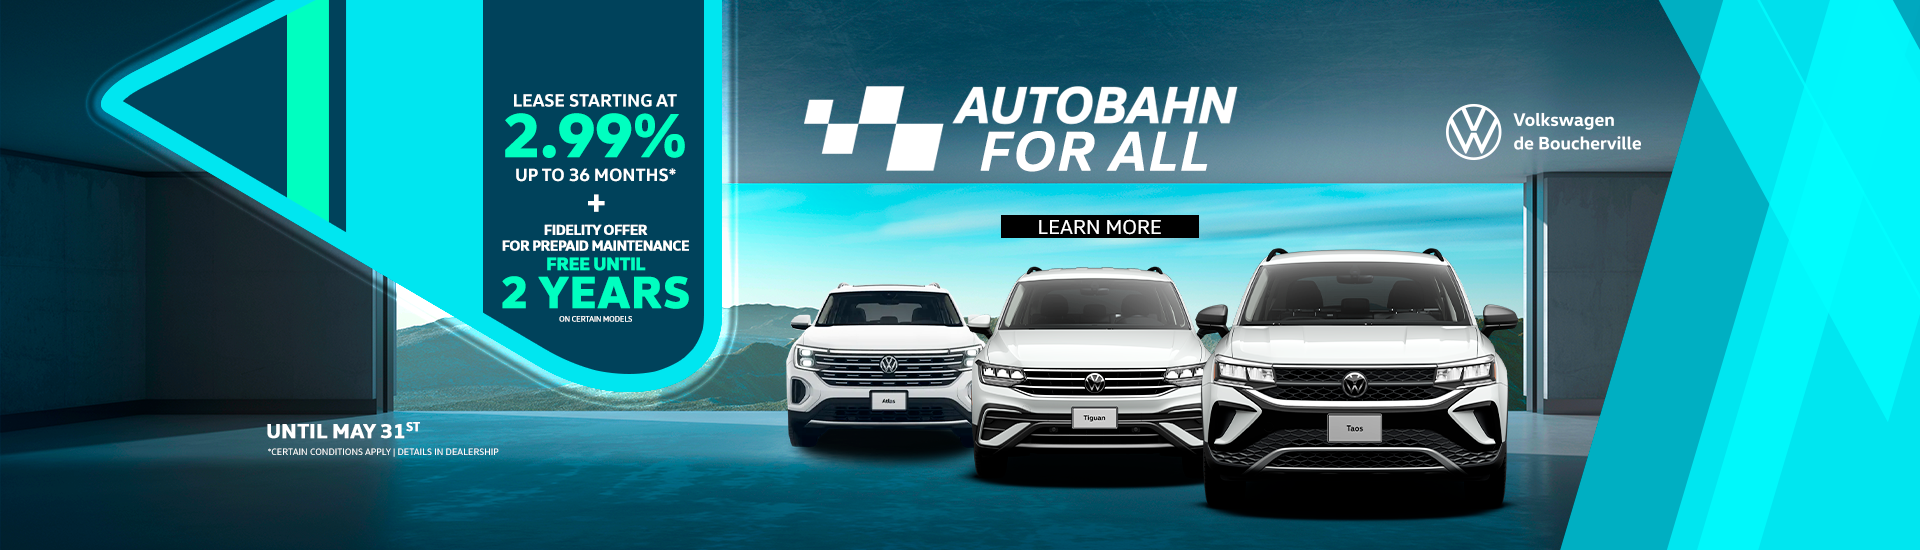 Autobahn for all event !